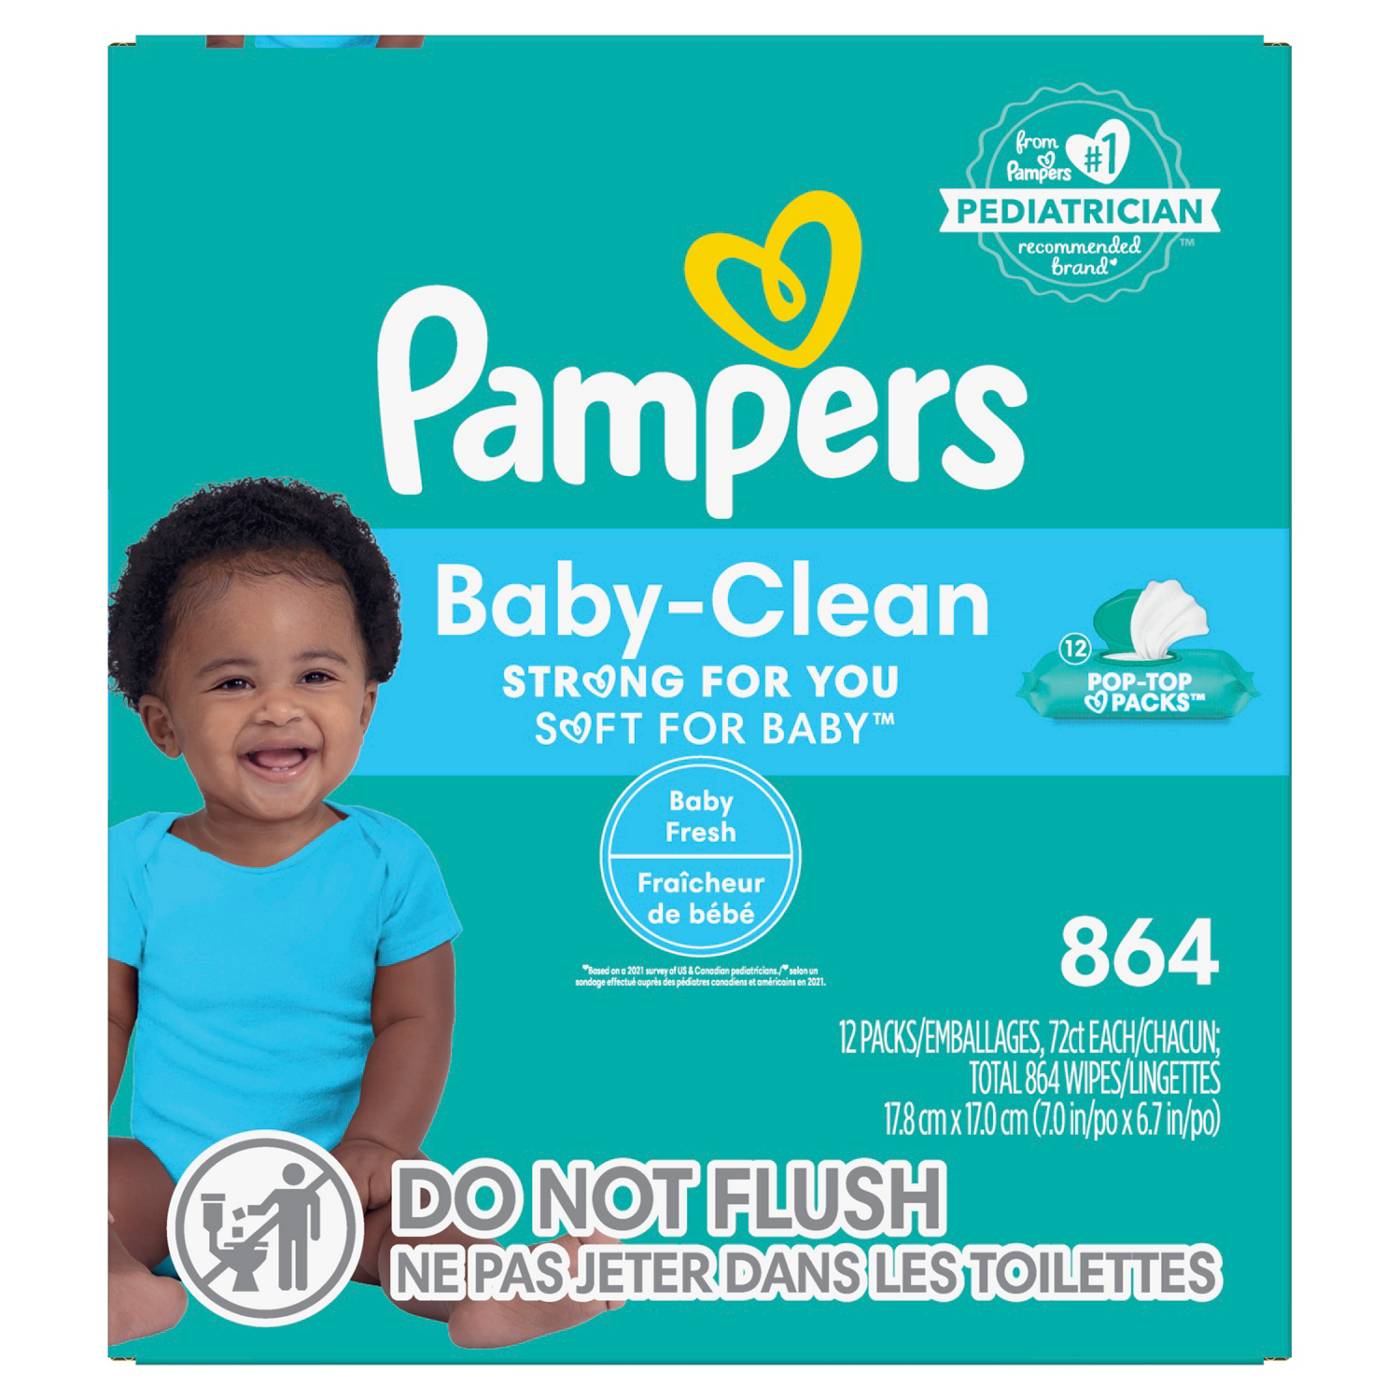 Pampers Baby Clean Baby Wipes - Fresh Scented  12 pk; image 6 of 9